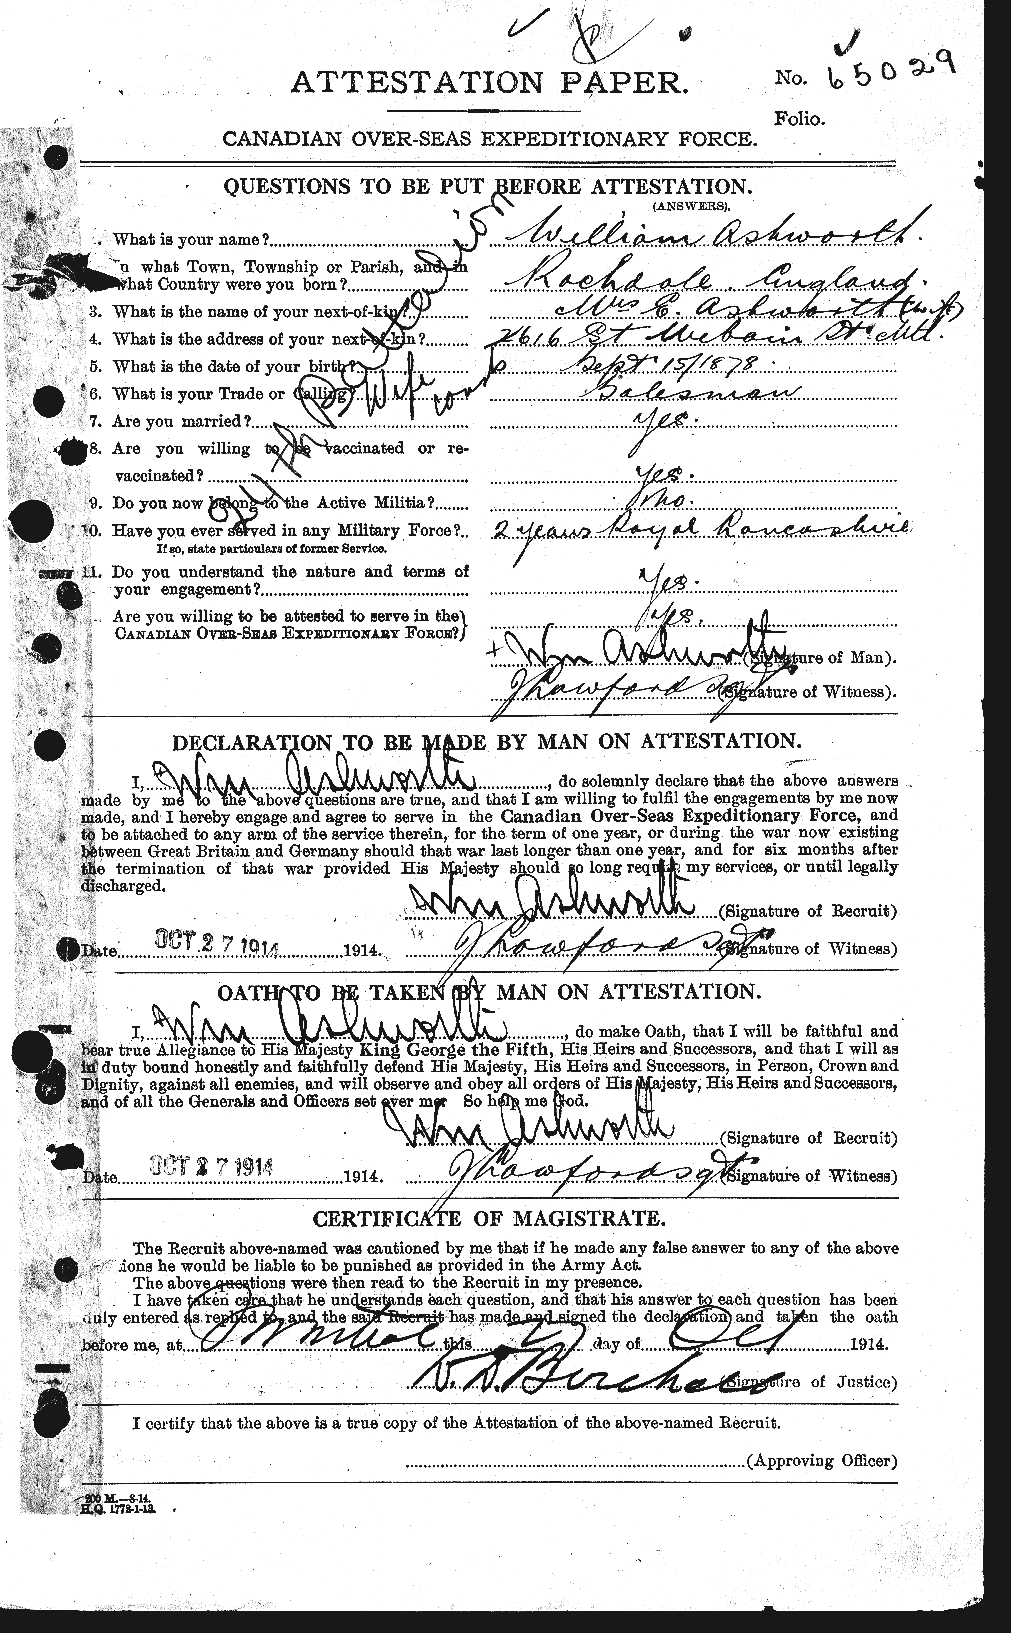 Personnel Records of the First World War - CEF 223700a